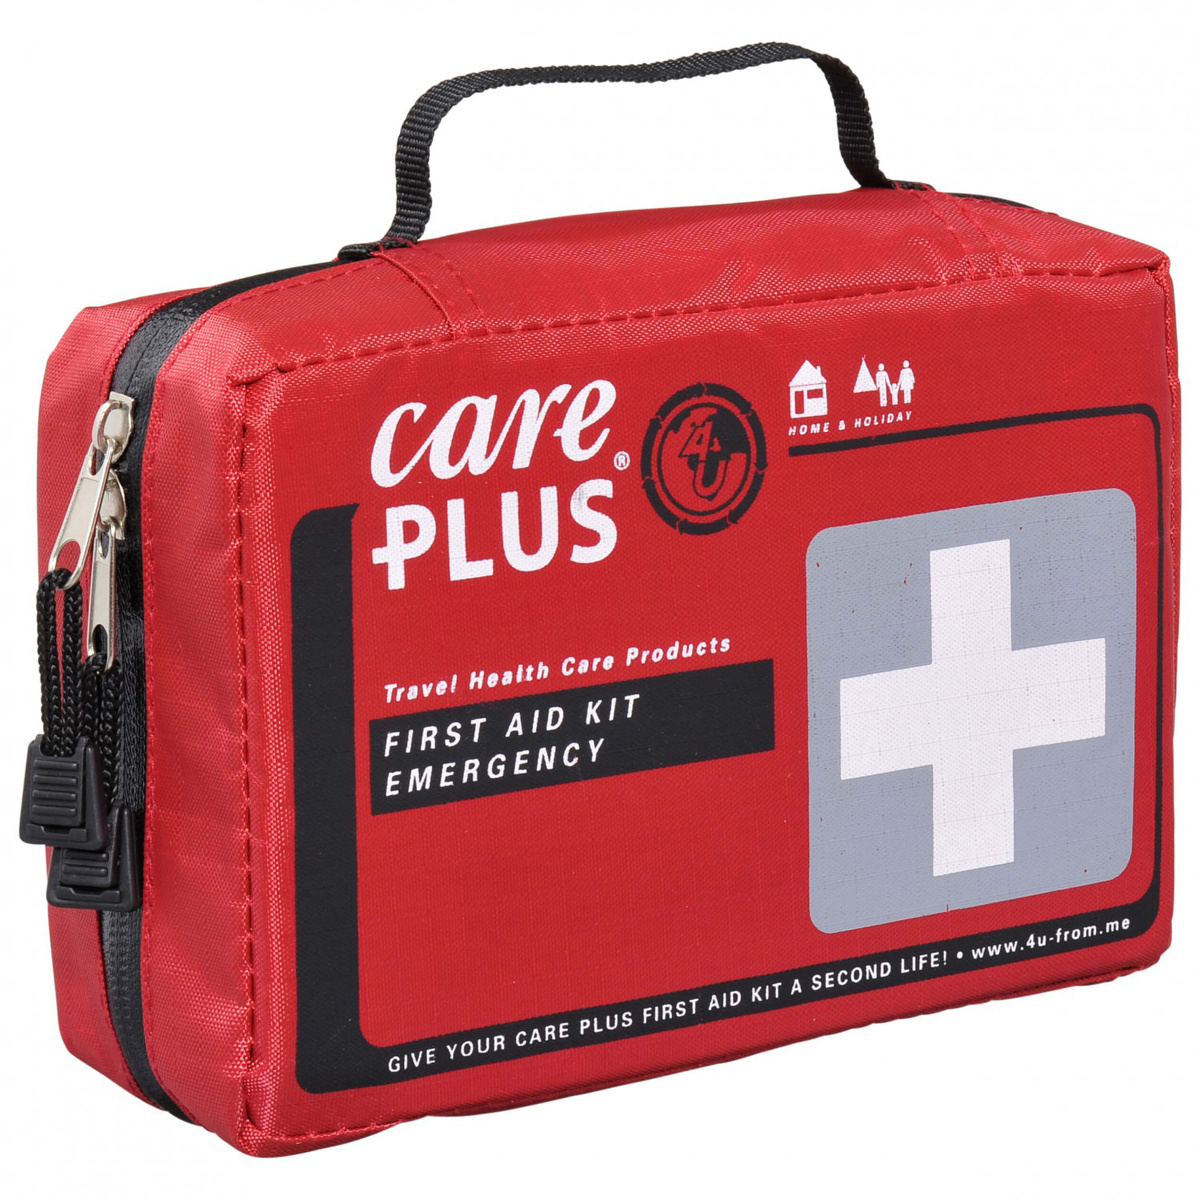 Image of Care Plus First Aid Kit Emergency